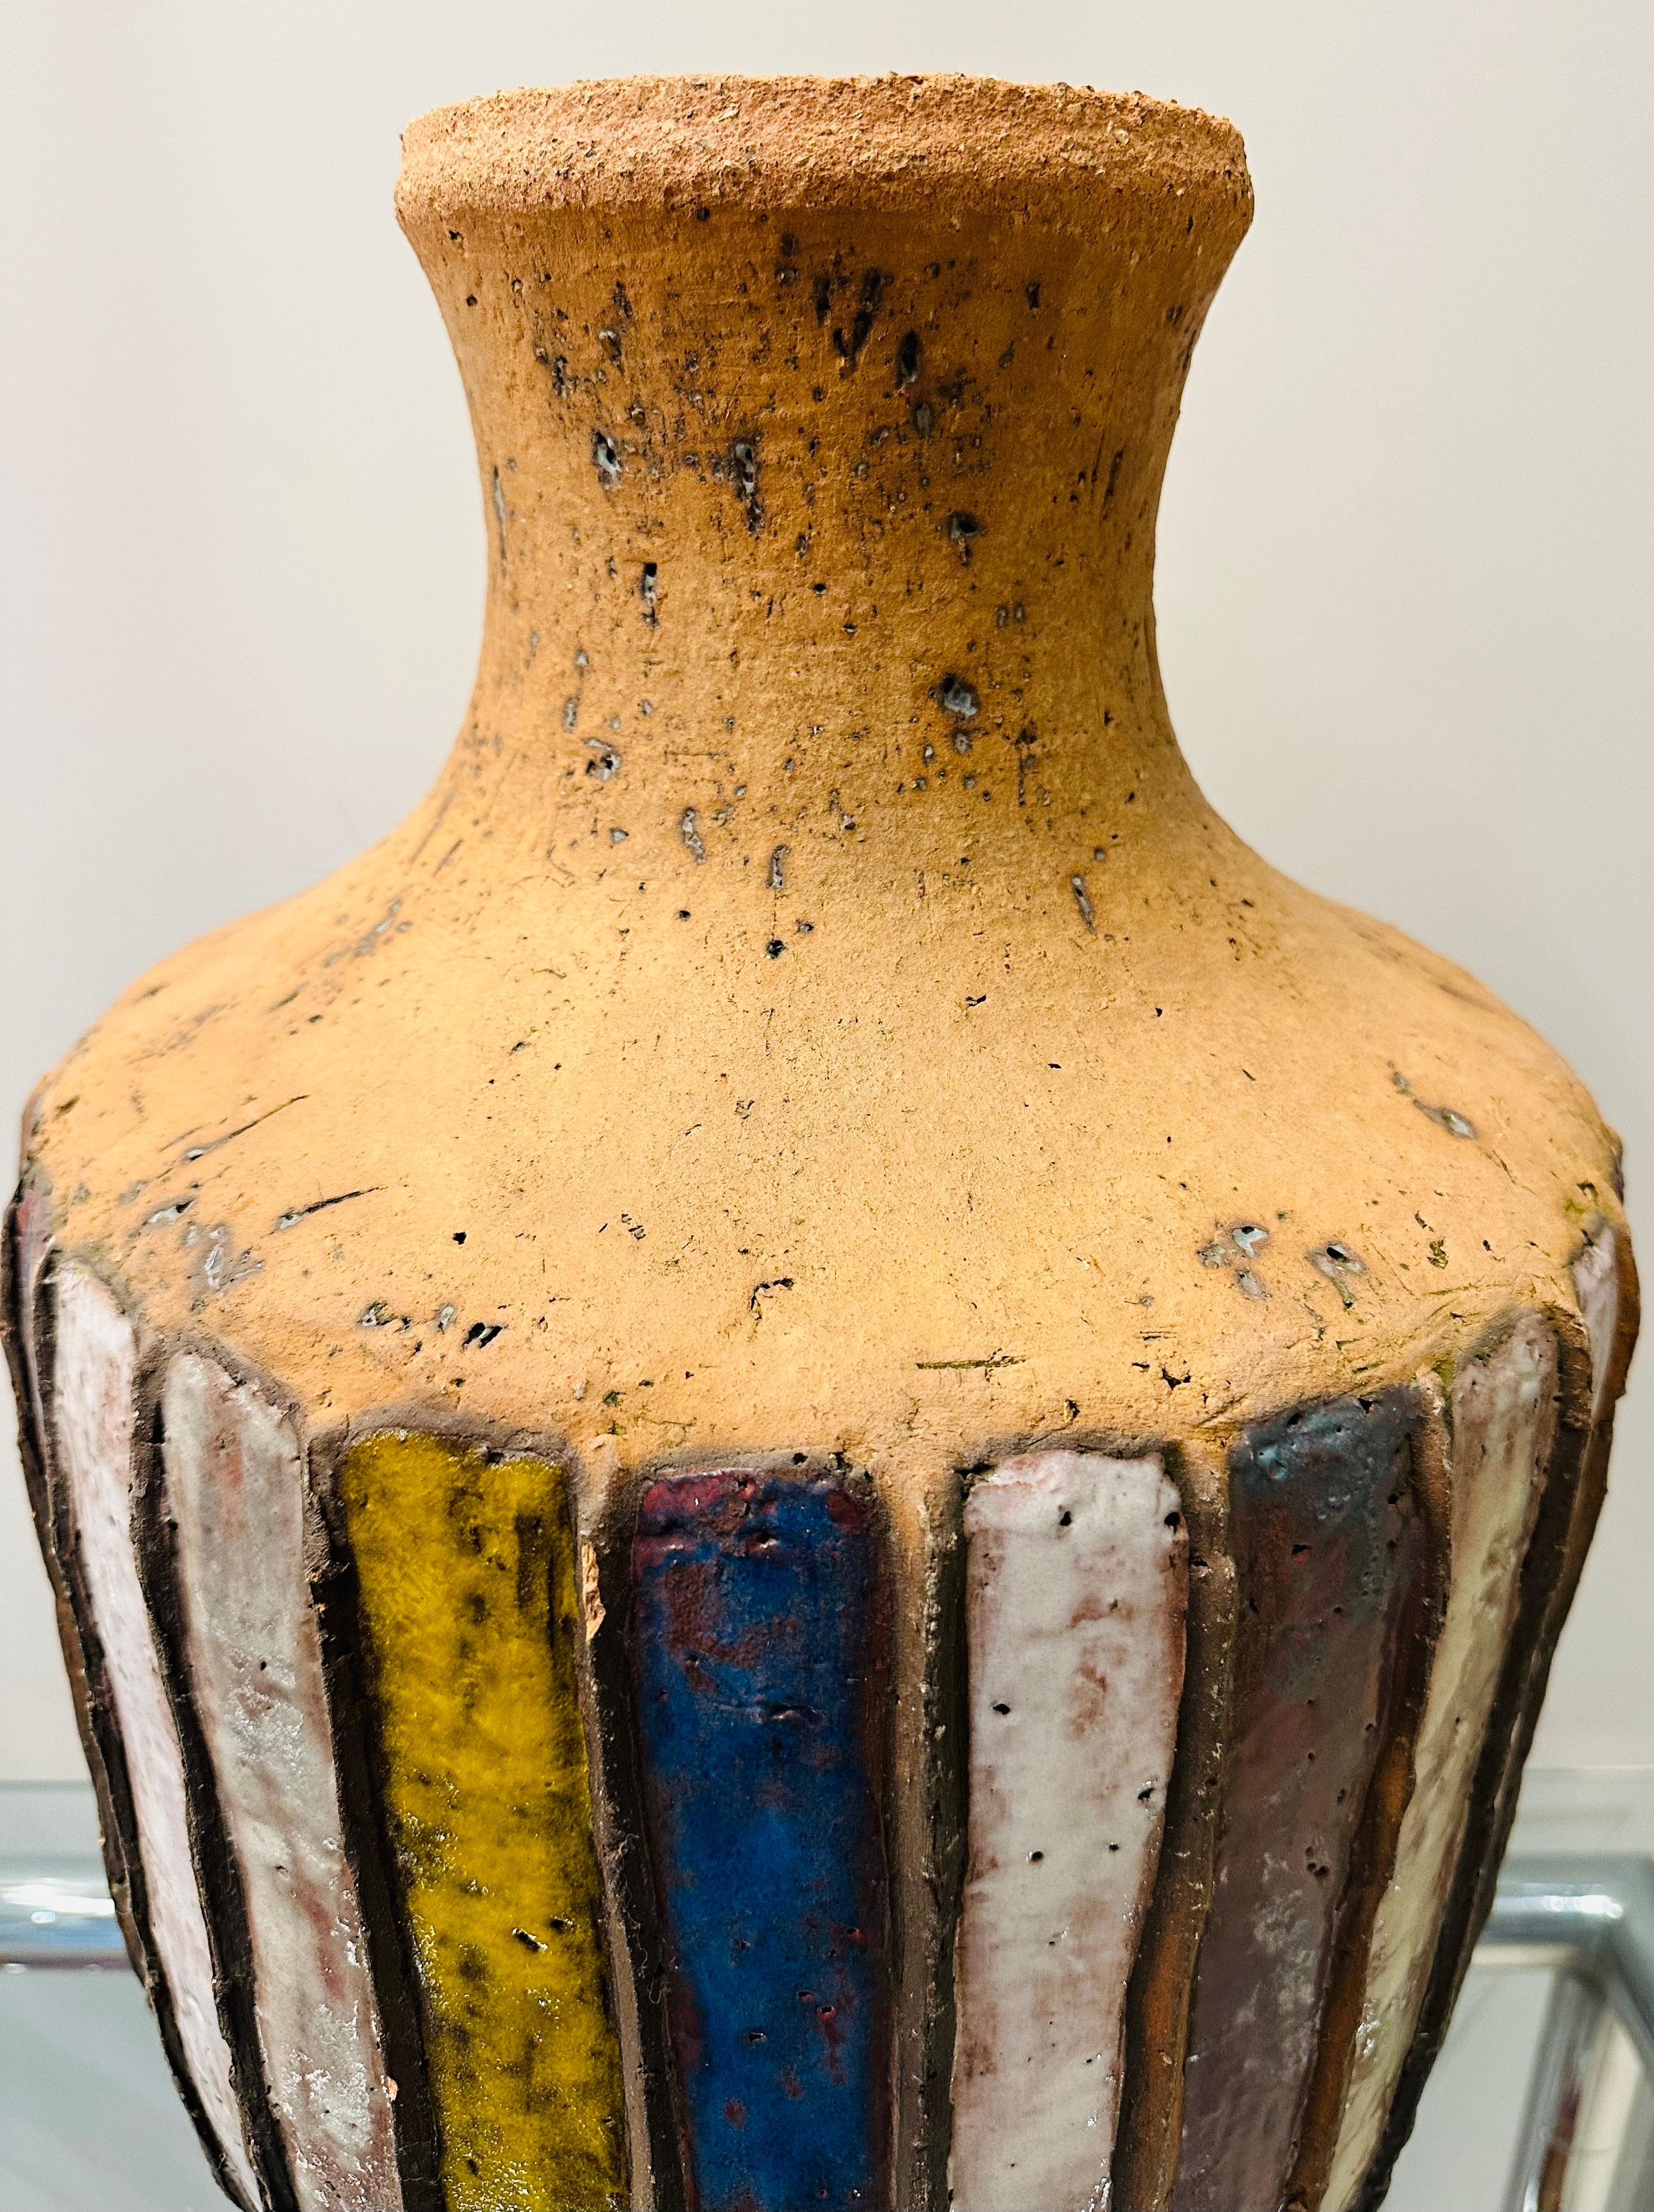 Large 1960s Handcrafted Italian Striped Glazed Pottery Earthenware Vase or Urn For Sale 5